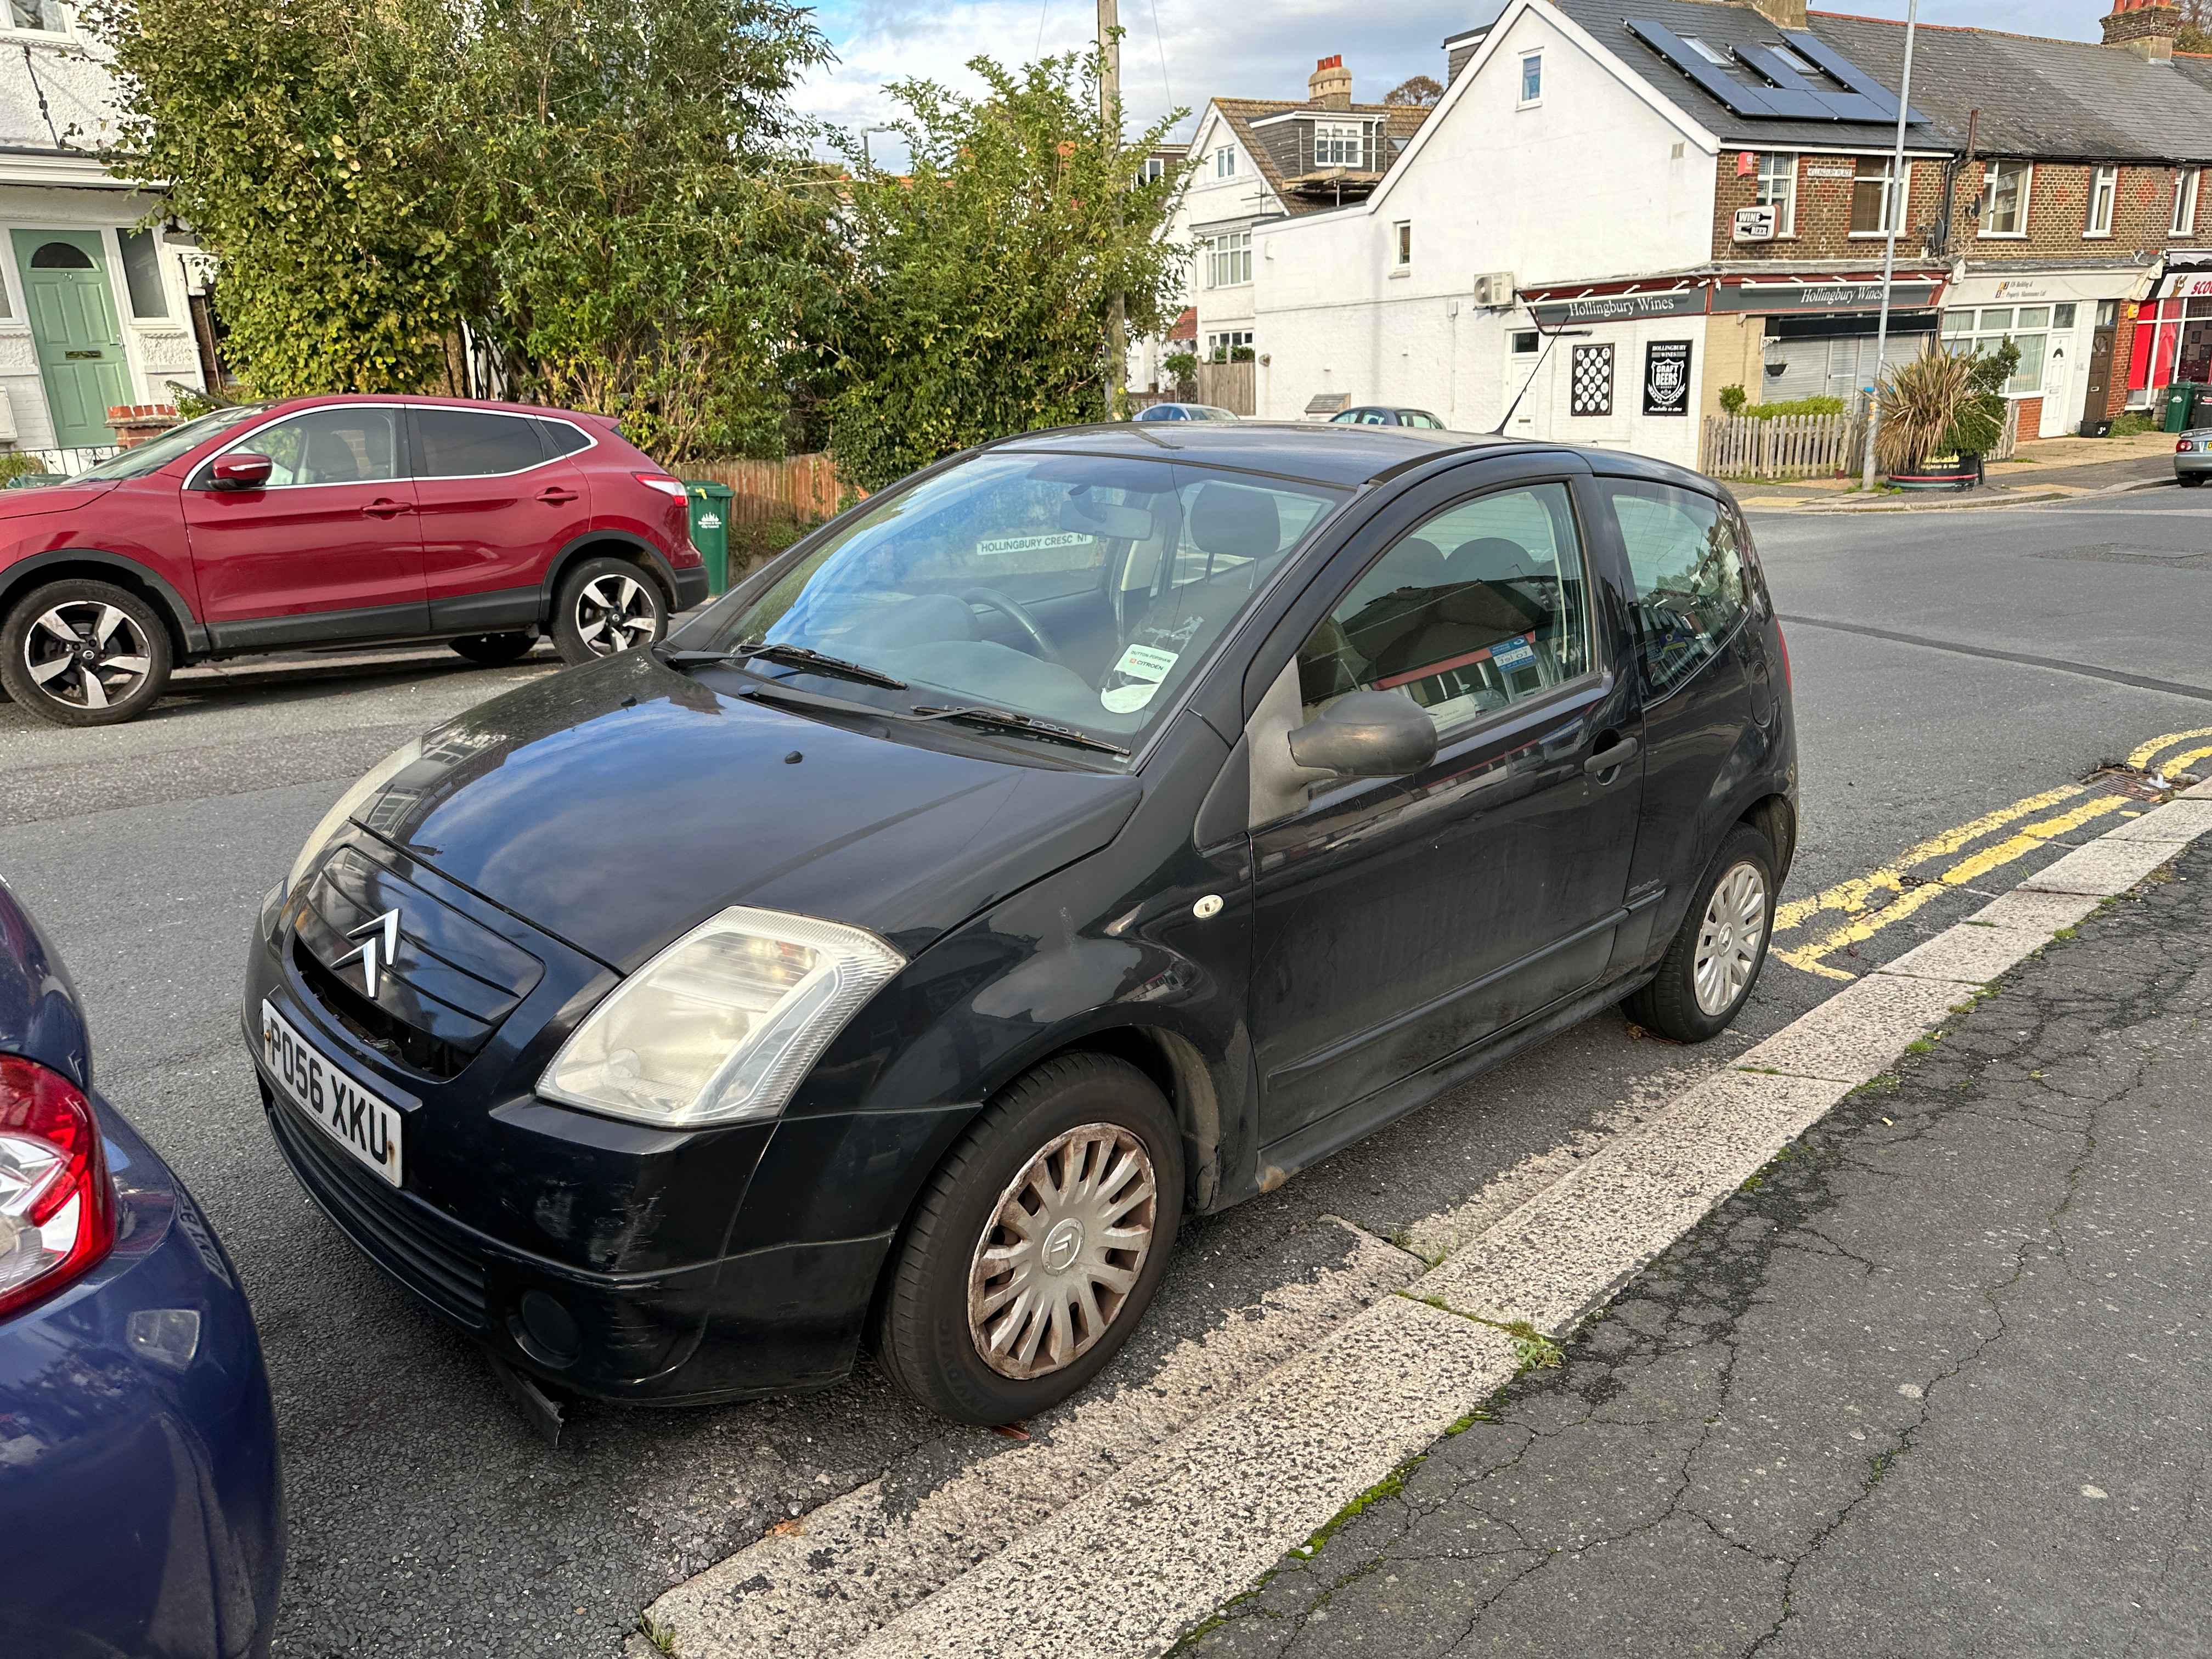 Photograph of PO56 XKU - a Black Citroen C2 parked in Hollingdean by a non-resident. The fourth of five photographs supplied by the residents of Hollingdean.